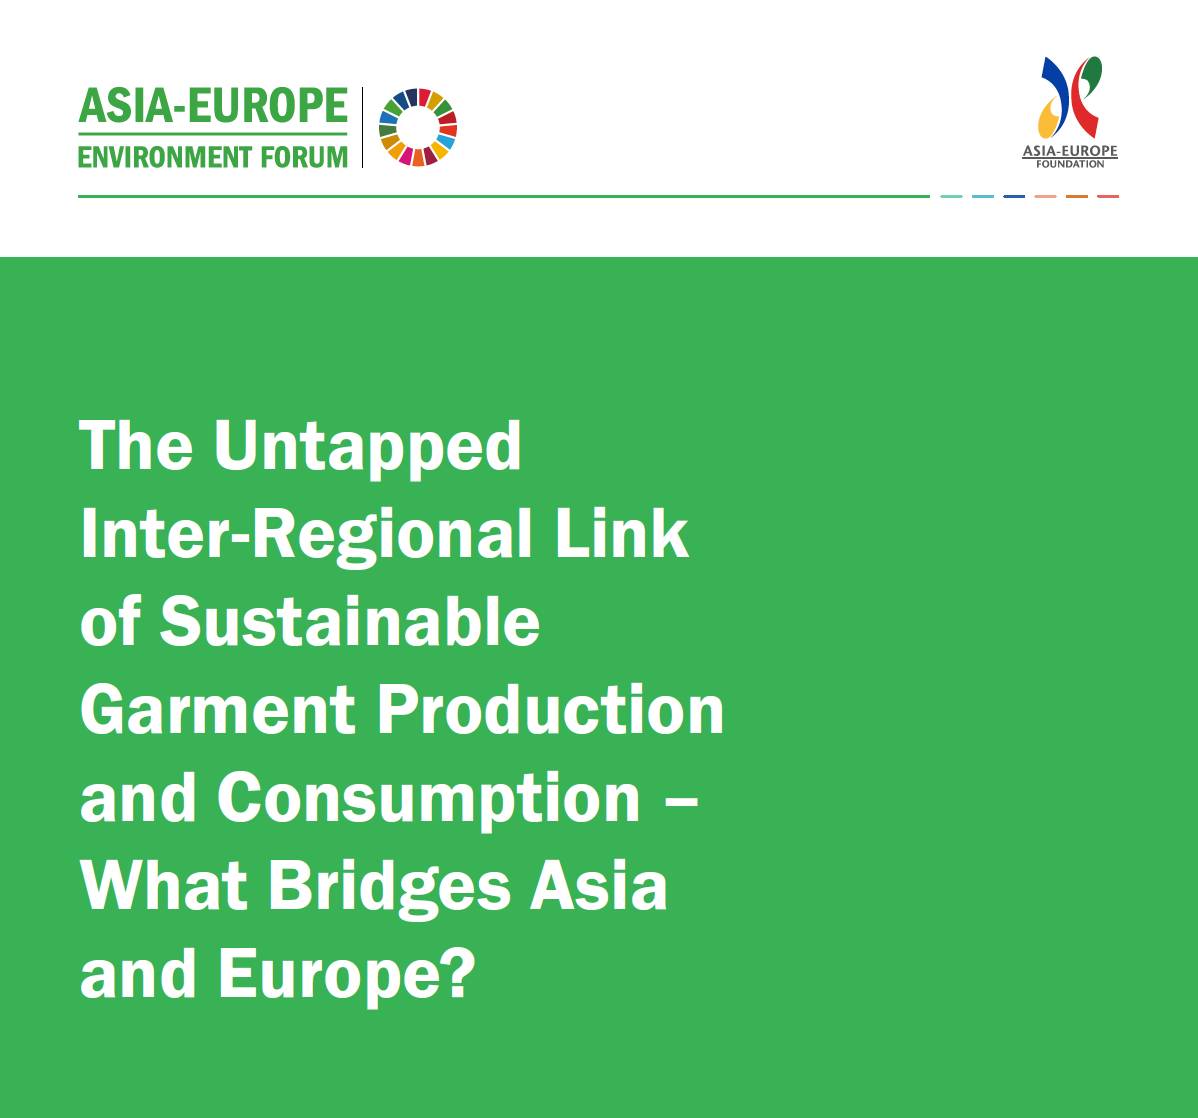 The Untapped Inter-Regional Link of Sustainable Garment Production and Consumption